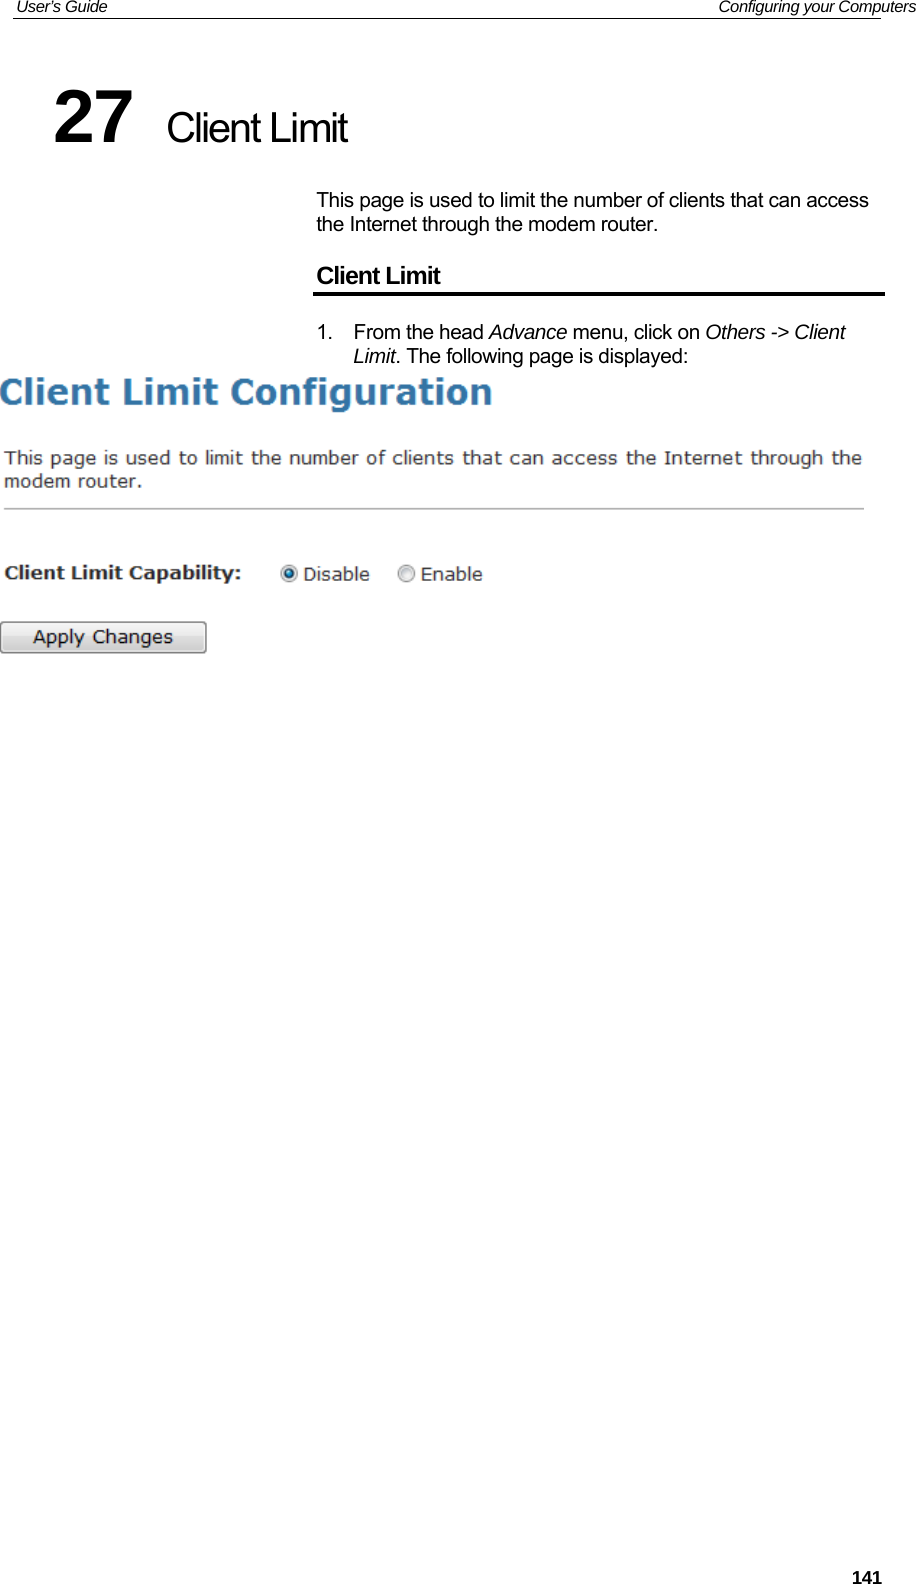 User’s Guide   Configuring your Computers 27  Client Limit This page is used to limit the number of clients that can access the Internet through the modem router. Client Limit 1. From the head Advance menu, click on Others -&gt; Client Limit. The following page is displayed:                                141